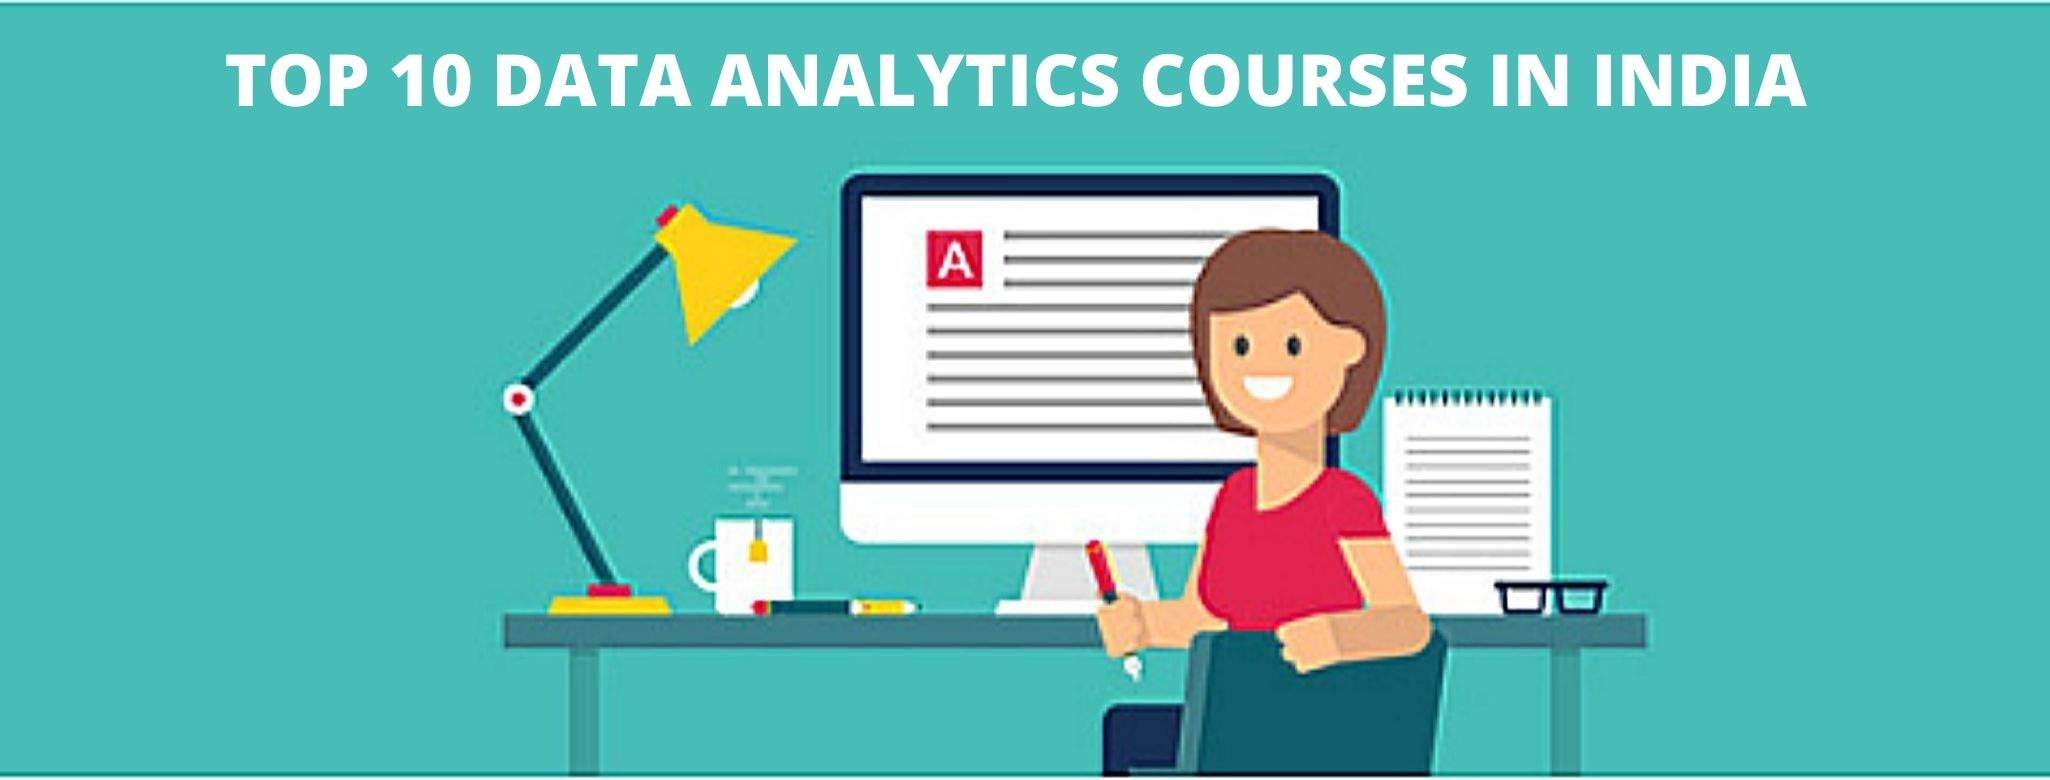 The image portrays top 10 data analytics courses in India